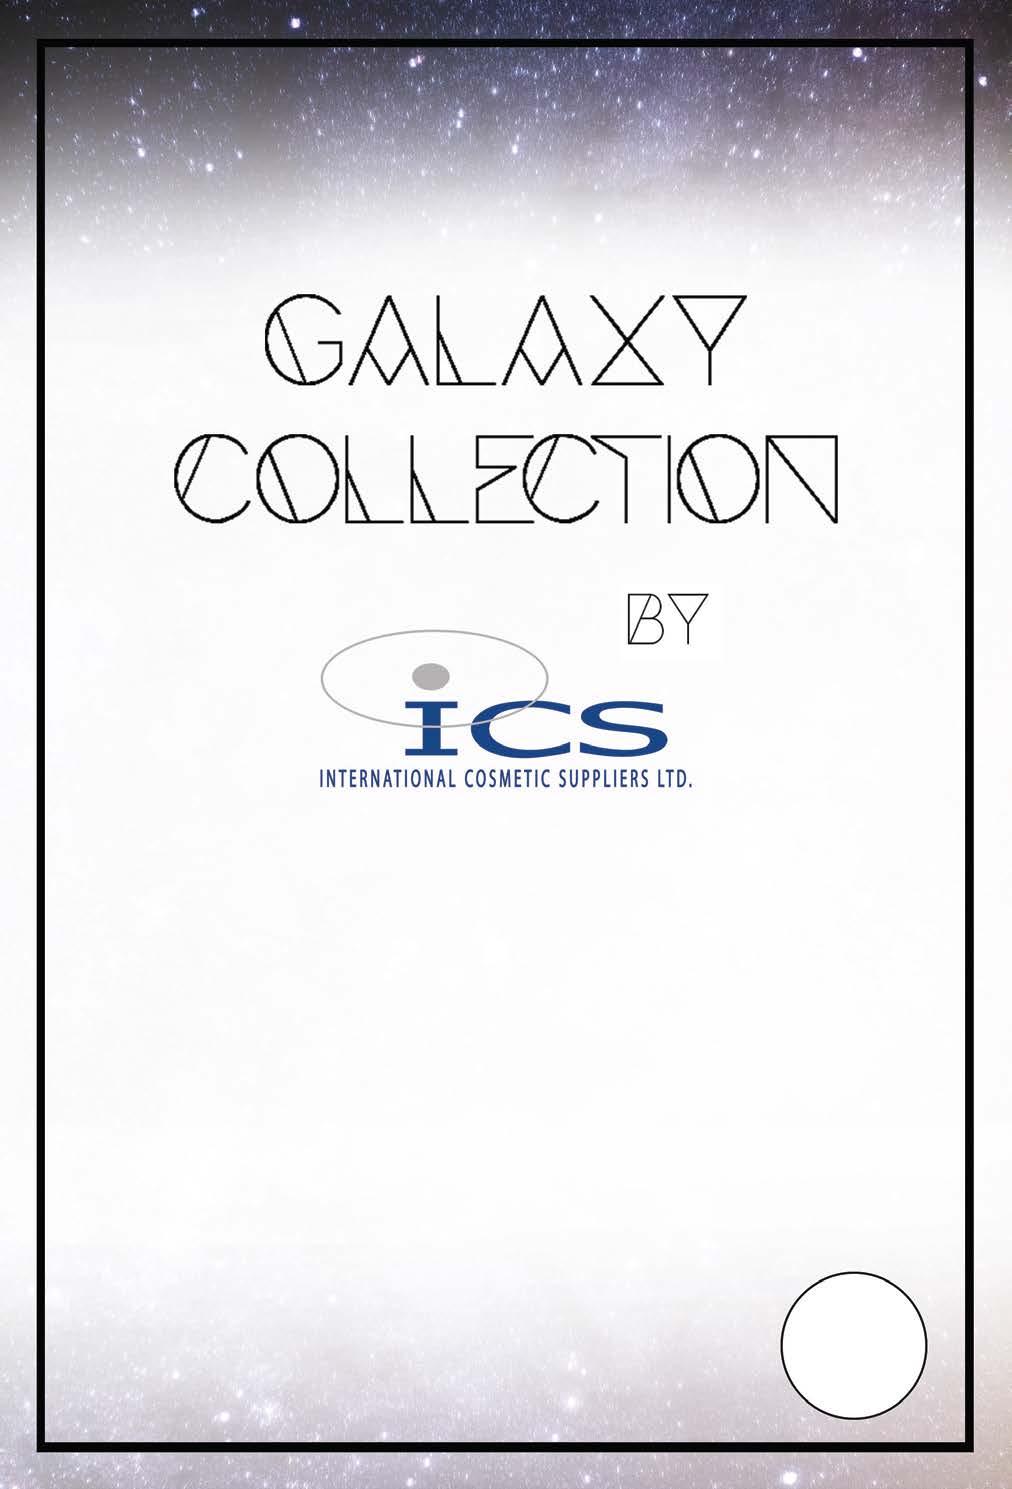 For more information on our Galaxy Collection, our other products or about ICS please visit